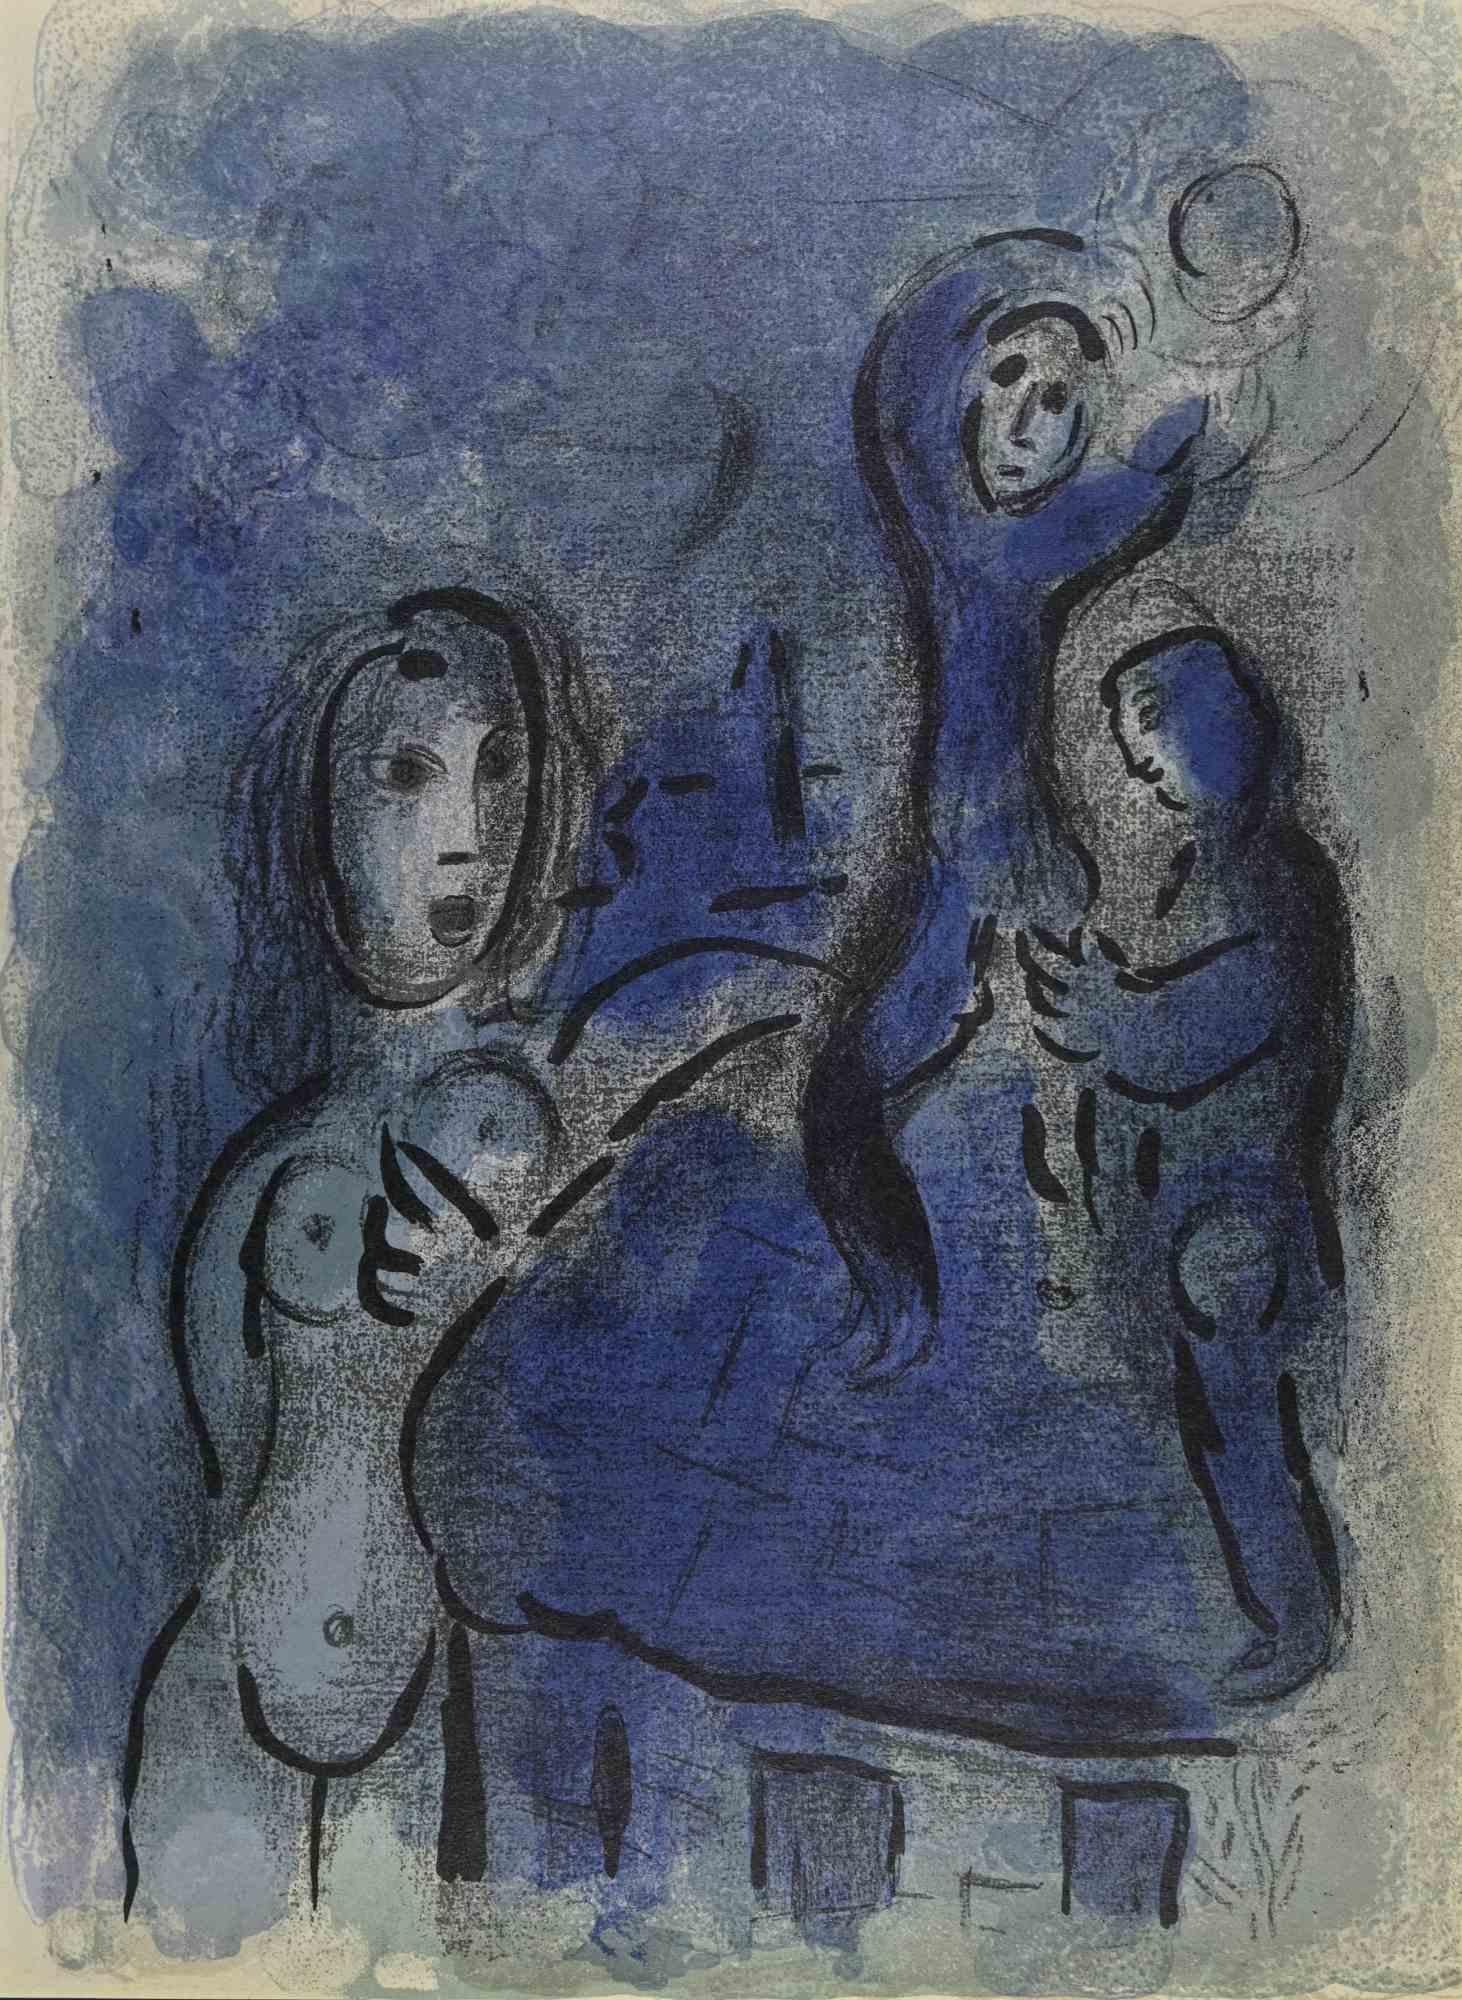 Naomi and her daughters is an artwork from the Series "The Bible", realized by Marc Chagall in 1960.

Rahab and the spies of Jericho is a an artwork from the Series "The Bible", by Marc Chagall in 1960.

Mixed colored lithograph on brown-toned